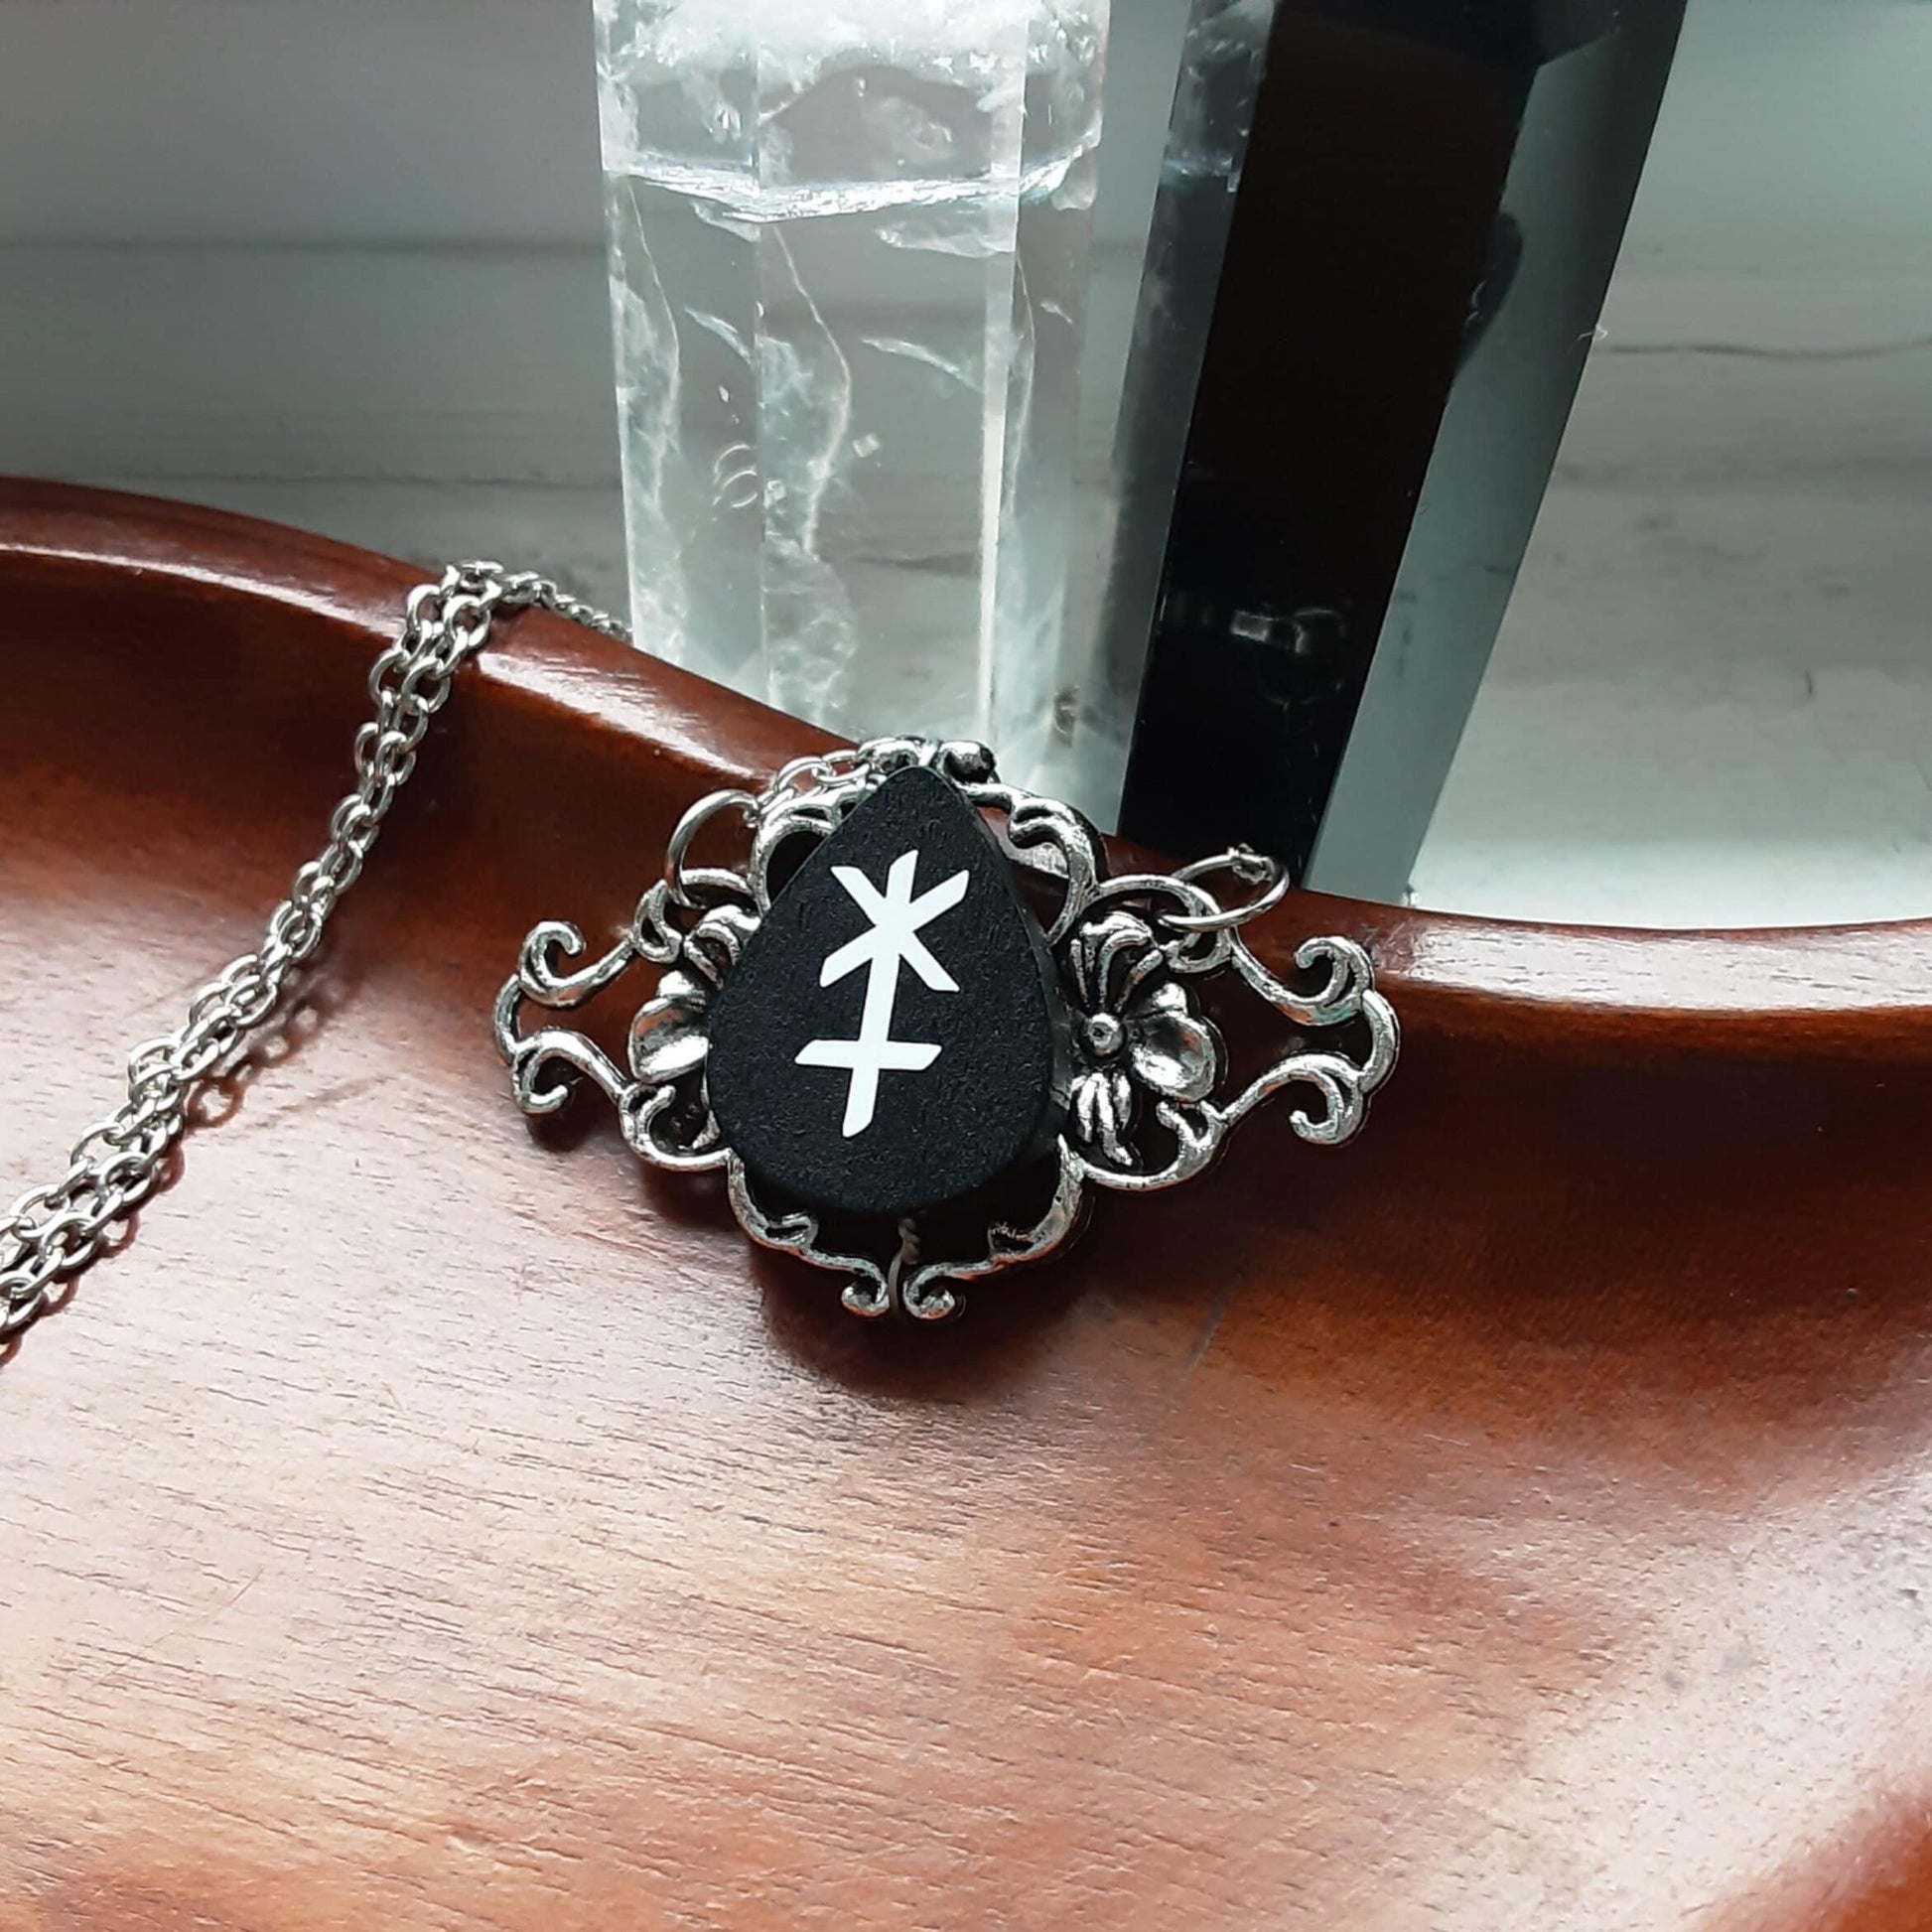 Hera Astrology Symbol Necklace on Wooden Plate with Clear Quartz and Obsidian Crystals in the background